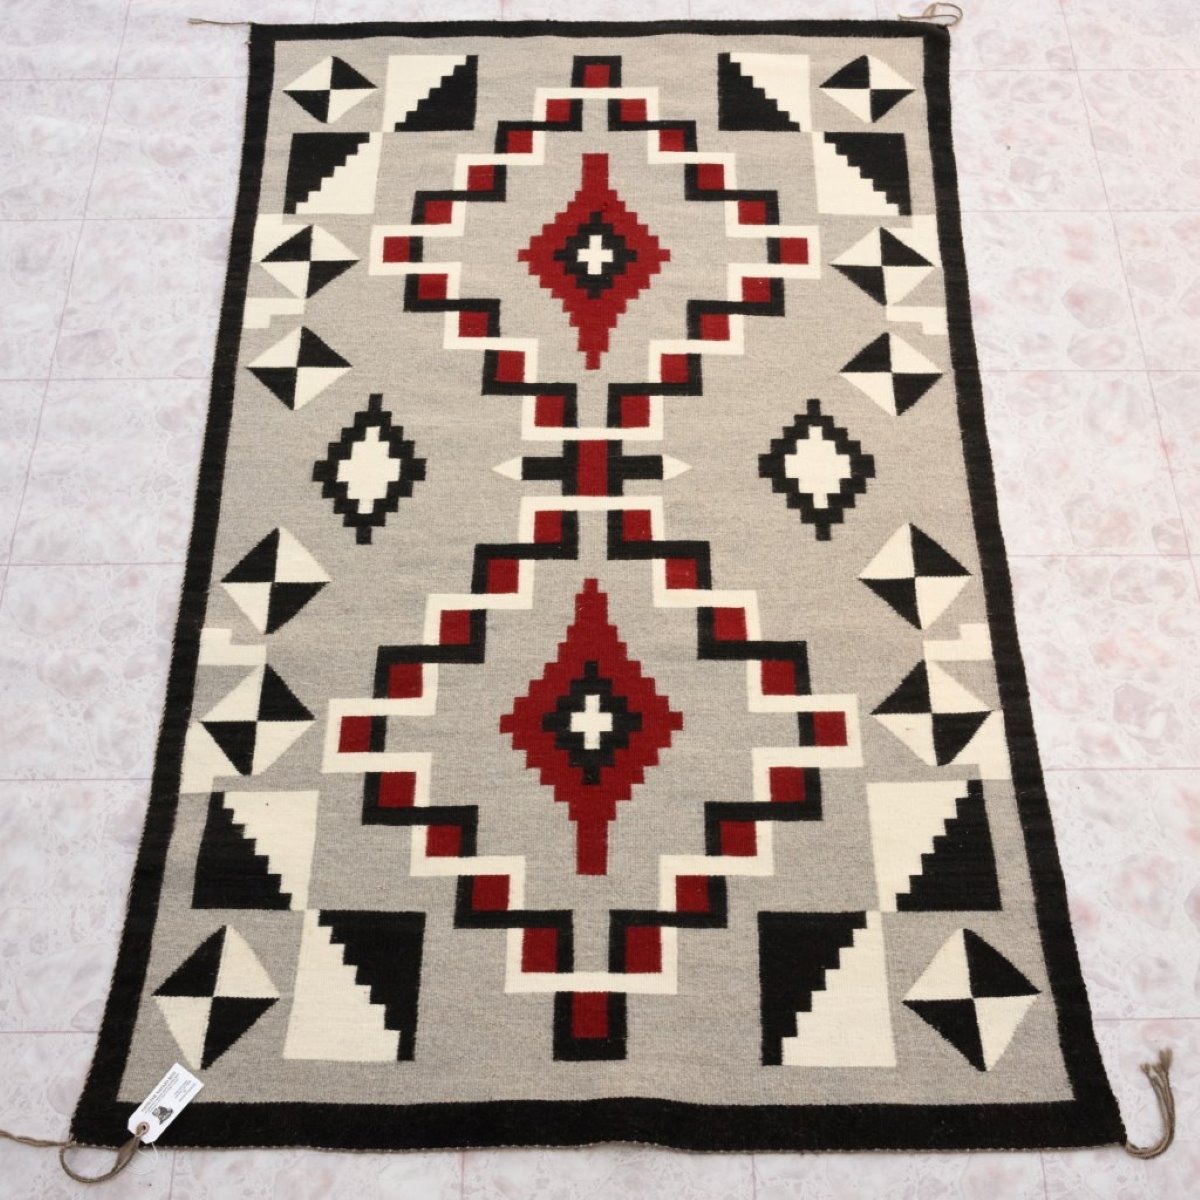 What Are The 4 Categories Of Navajo Rugs?